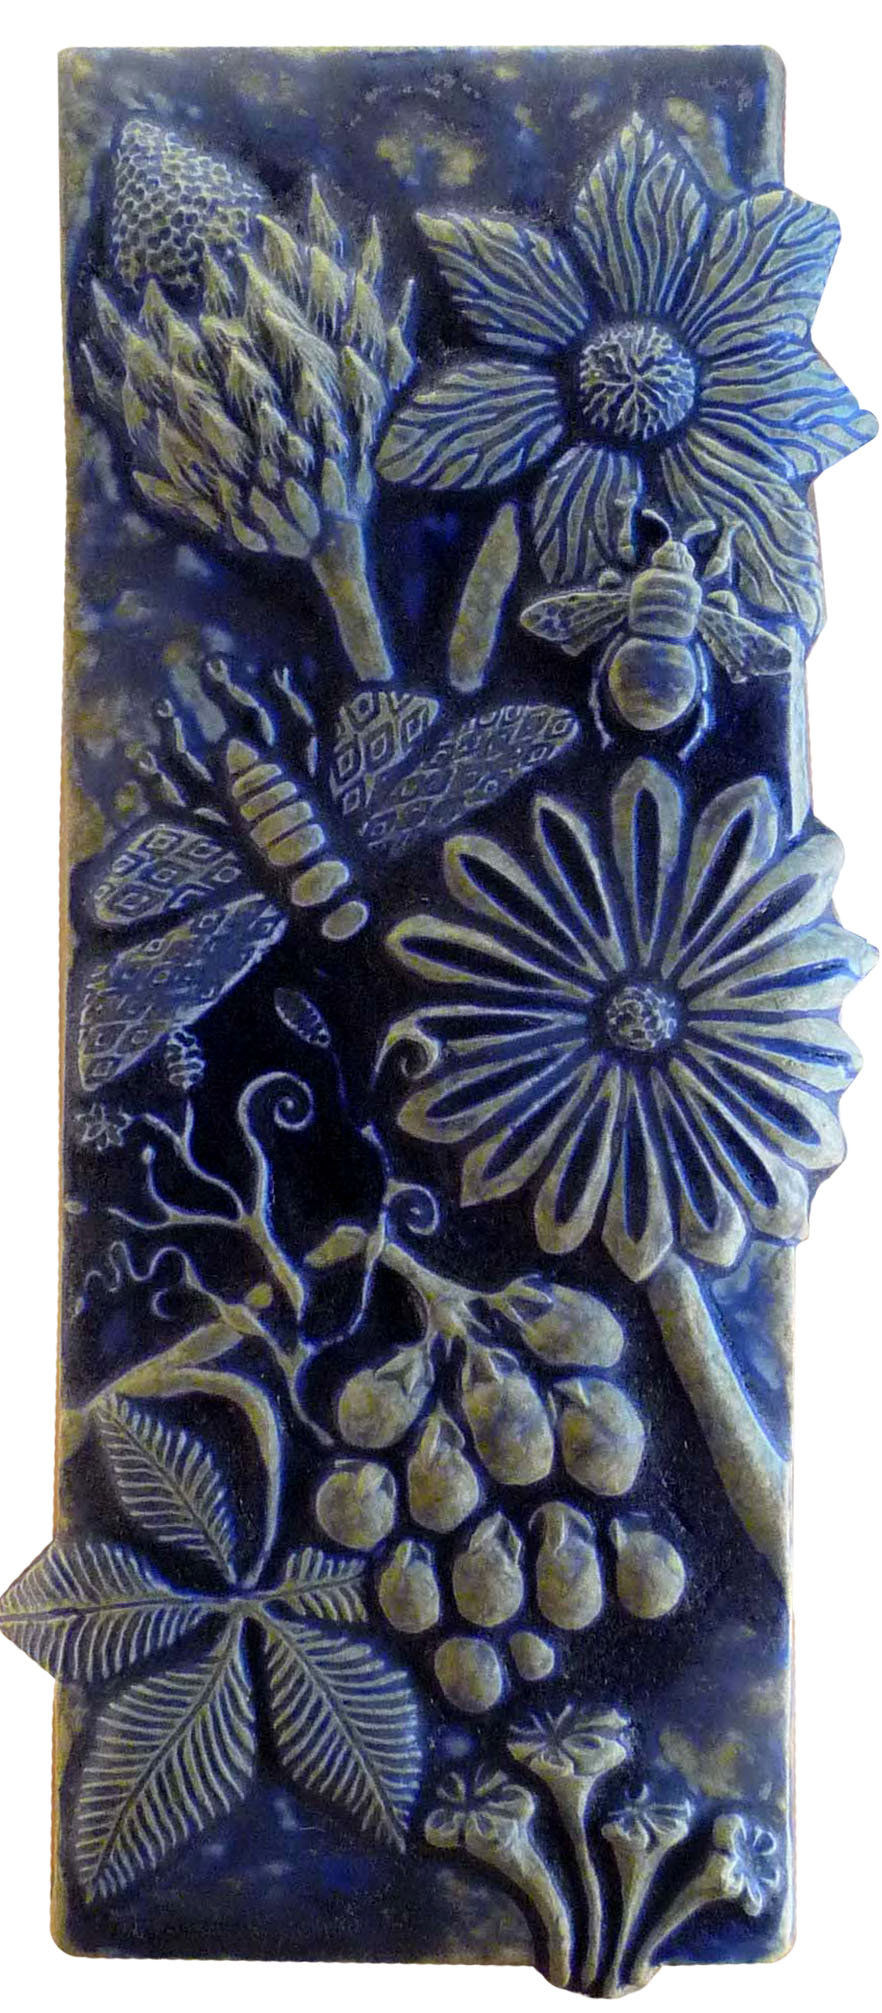 Botanical and Bugs Ceramic Tile in Night Sky Glaze by Beth Sherman